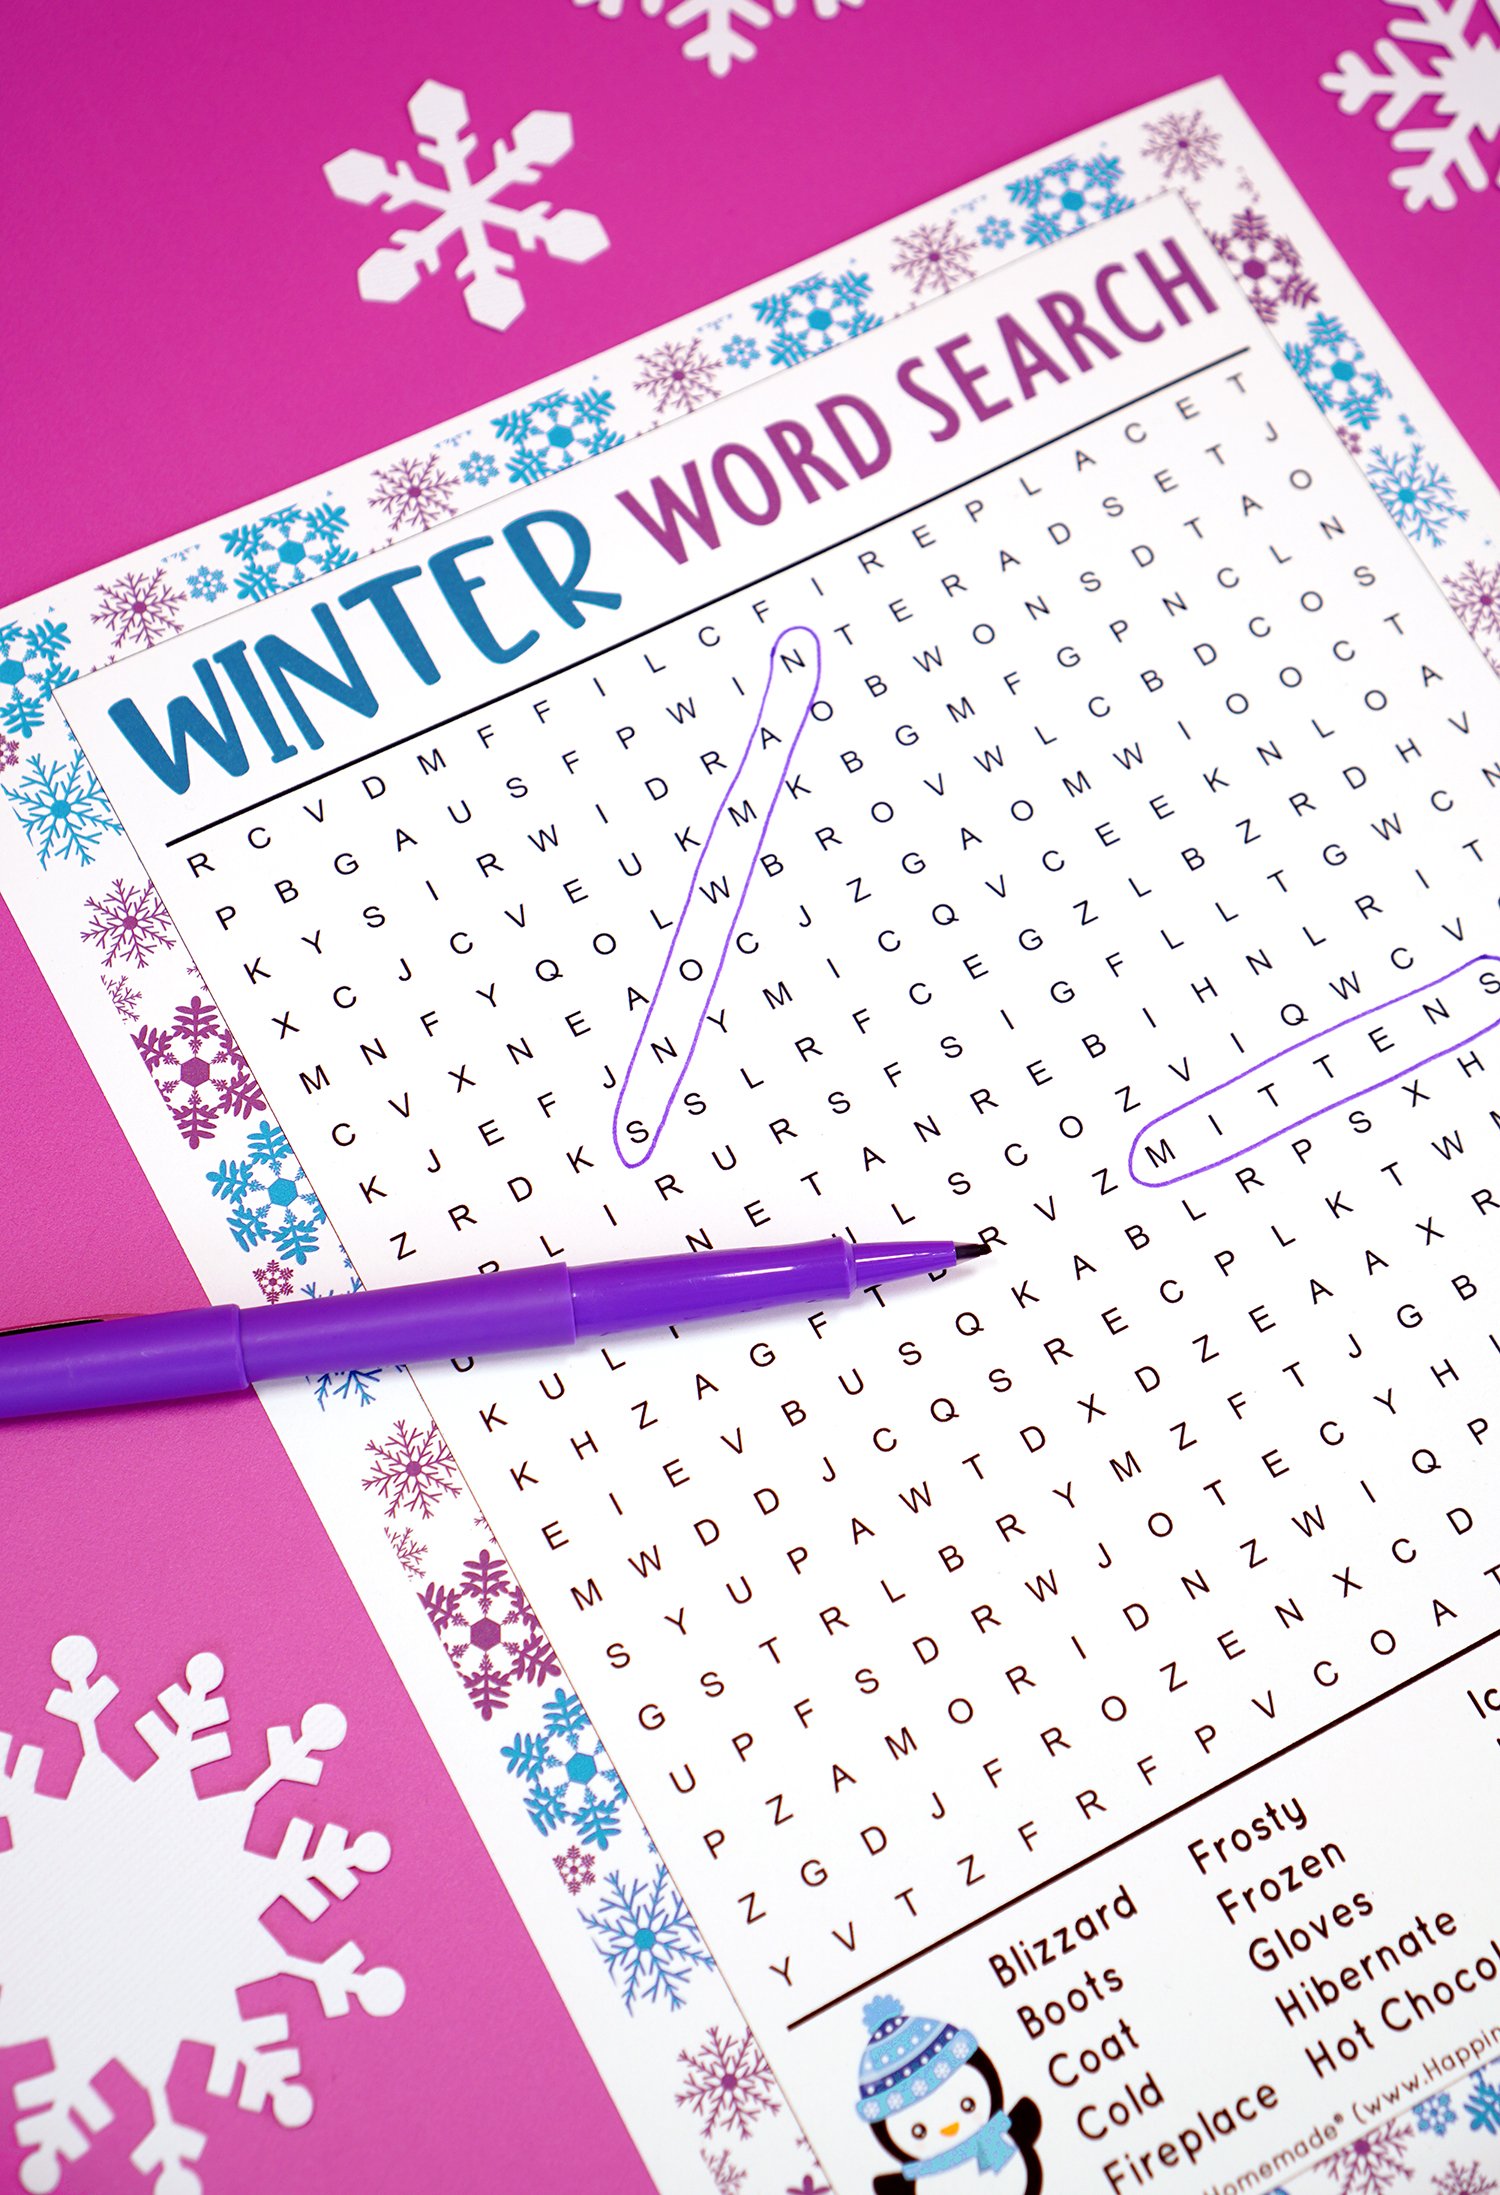 Close up of Winter word search printable puzzle on purple background with snowflakes and purple pen